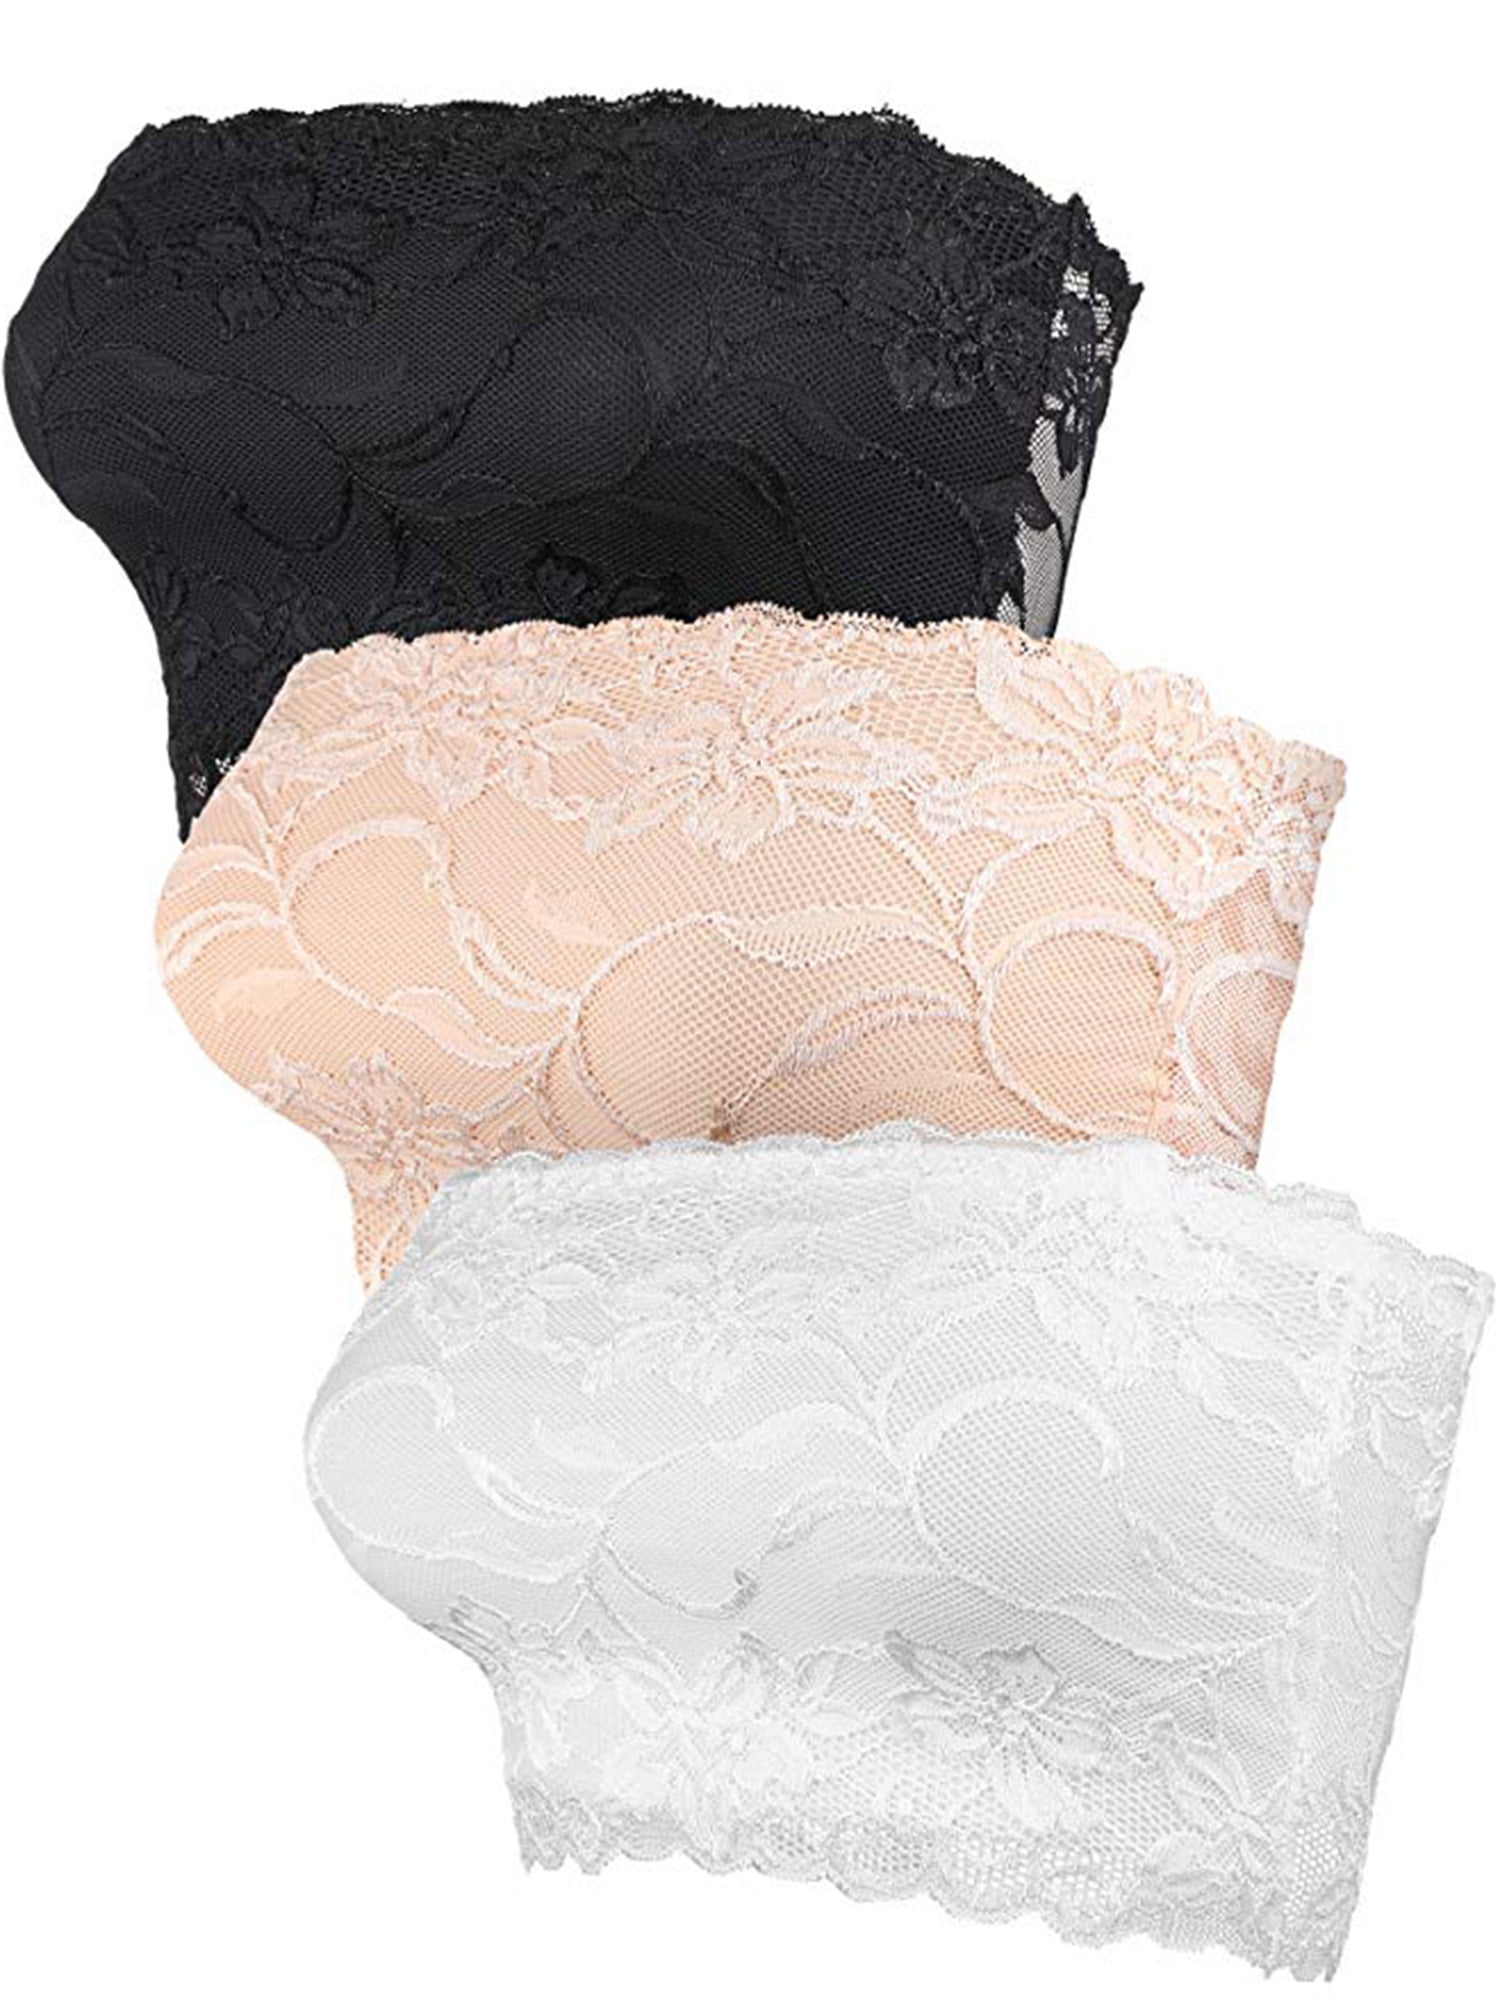 Women Sexy Lace Bra Underwire Push Up Lace Bralettes Padded Lace Bralettes  Bandeau Bra,Cute 3/4 Cover Multi-color Everyday Bra,Adjustable Strap